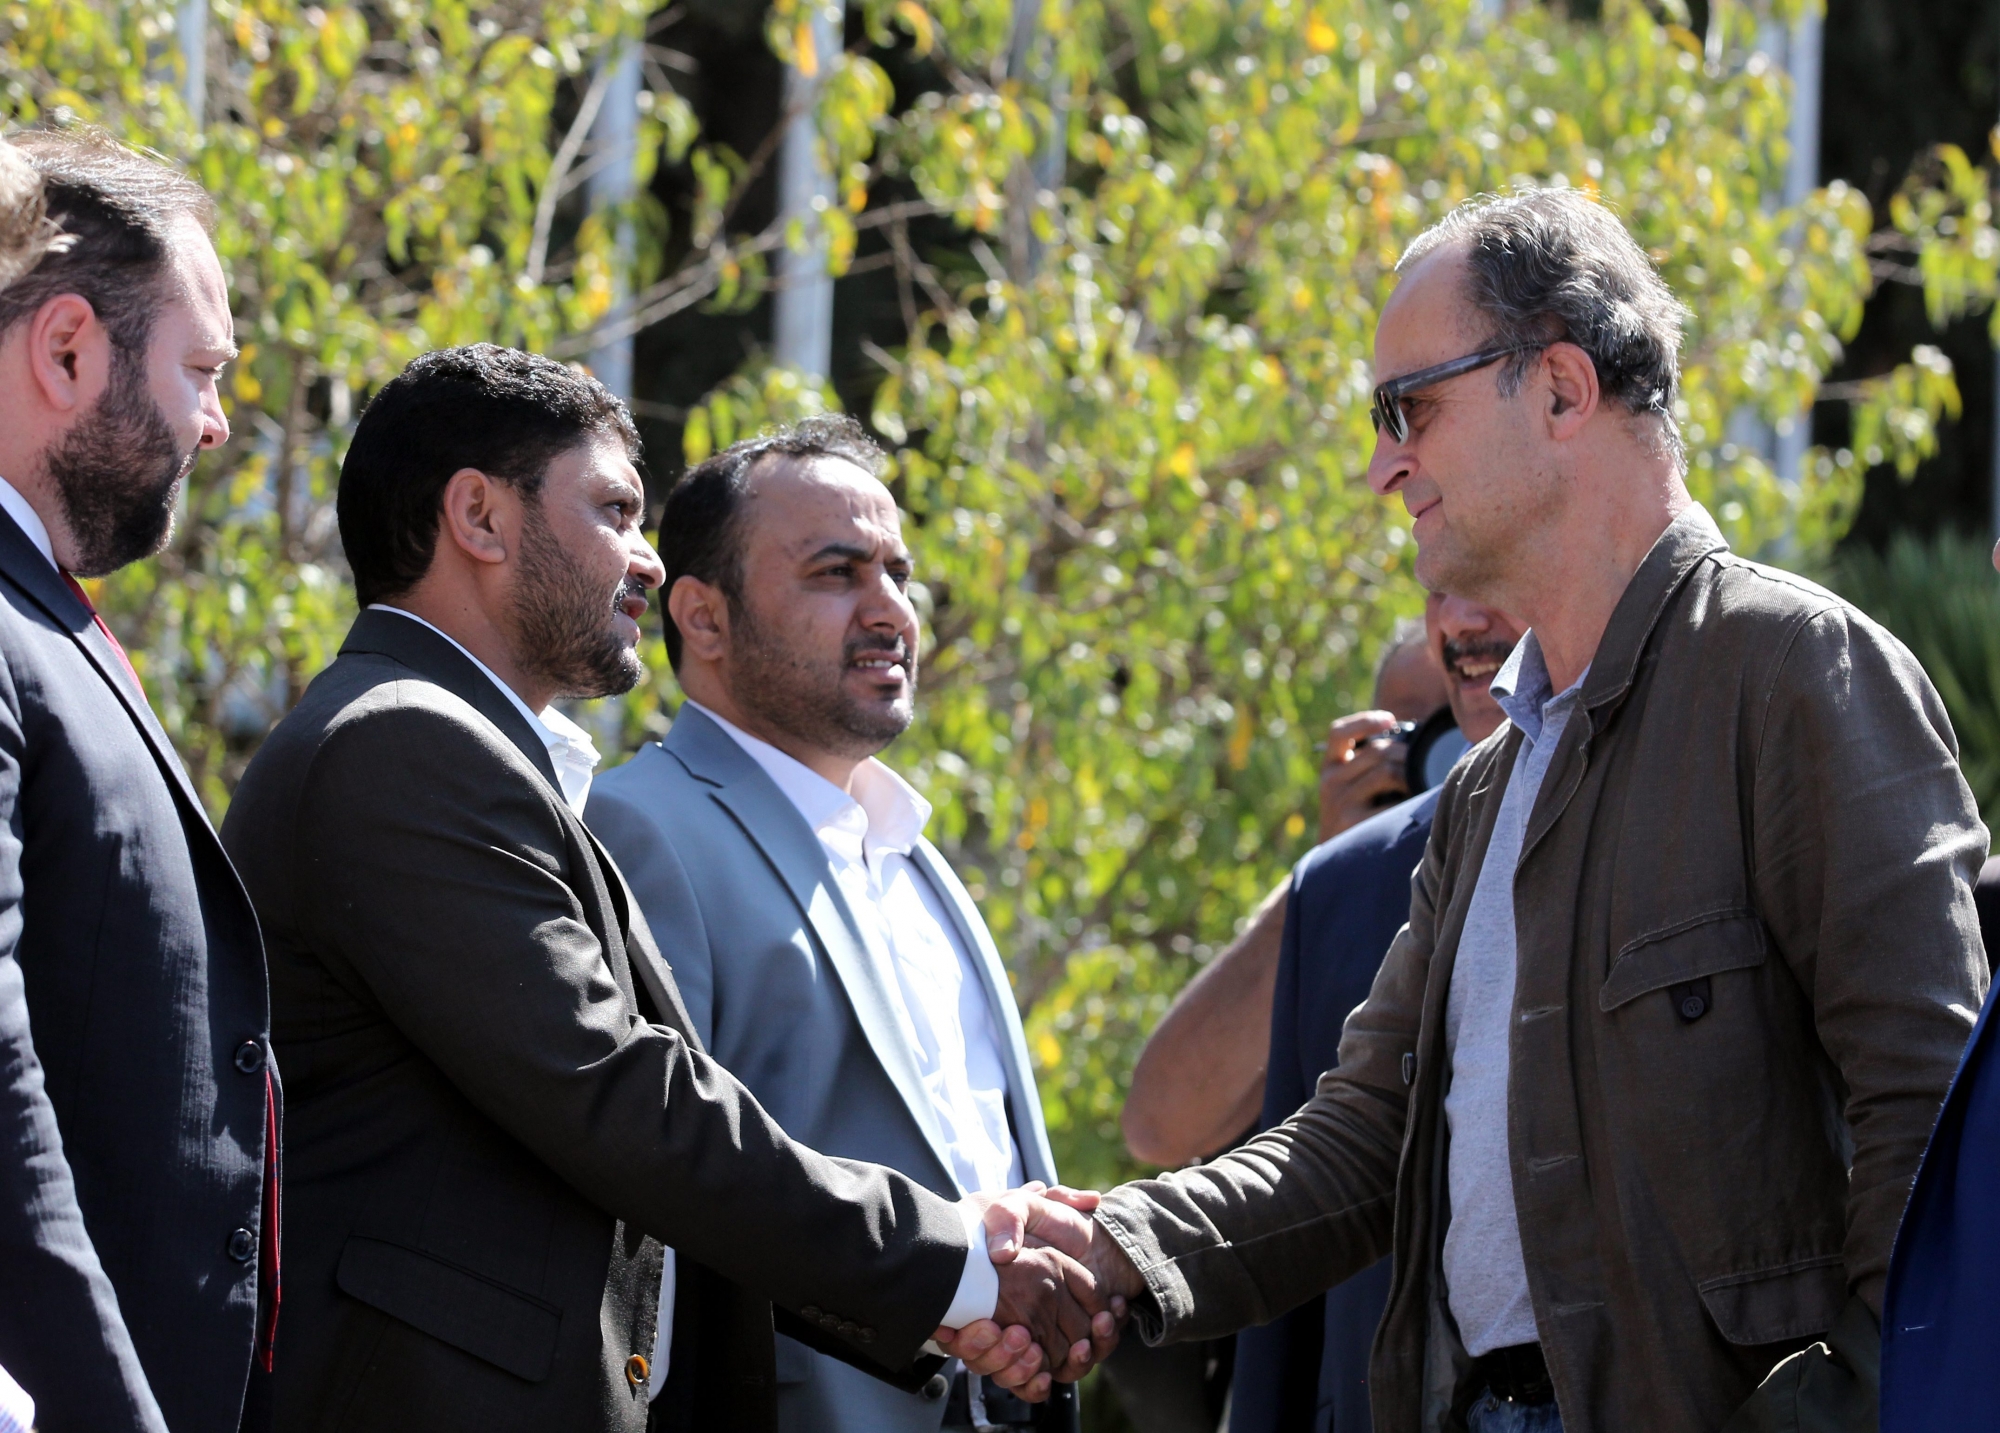 epa07246756 Retired Dutch General Patrick Cammaert (R), head of a UN truce team tasked with monitoring a ceasefire in the port city of Hodeidah, is greeted by Houthi representatives upon his arrival at SanaÄôa airport in SanaÄôa, Yemen, 23 December 2018. According to reports, the head of a UN truce team tasked with monitoring a ceasefire in YemenÄôs port city of Hodeidah, Retired Dutch General Patrick Cammaert, arrived in SanaÄôa before heading along with members of the team for Hodeidah to start the supervision of the ceasefire agreement between the Houthi rebels and YemenÄôs Saudi-backed government troops, ten days after it was signed by YemenÄôs two warring factions during UN-brokered peace talks held in Sweden.  EPA/YAHYA ARHAB YEMEN CONFLICT UN CEASEFIRE TEAM